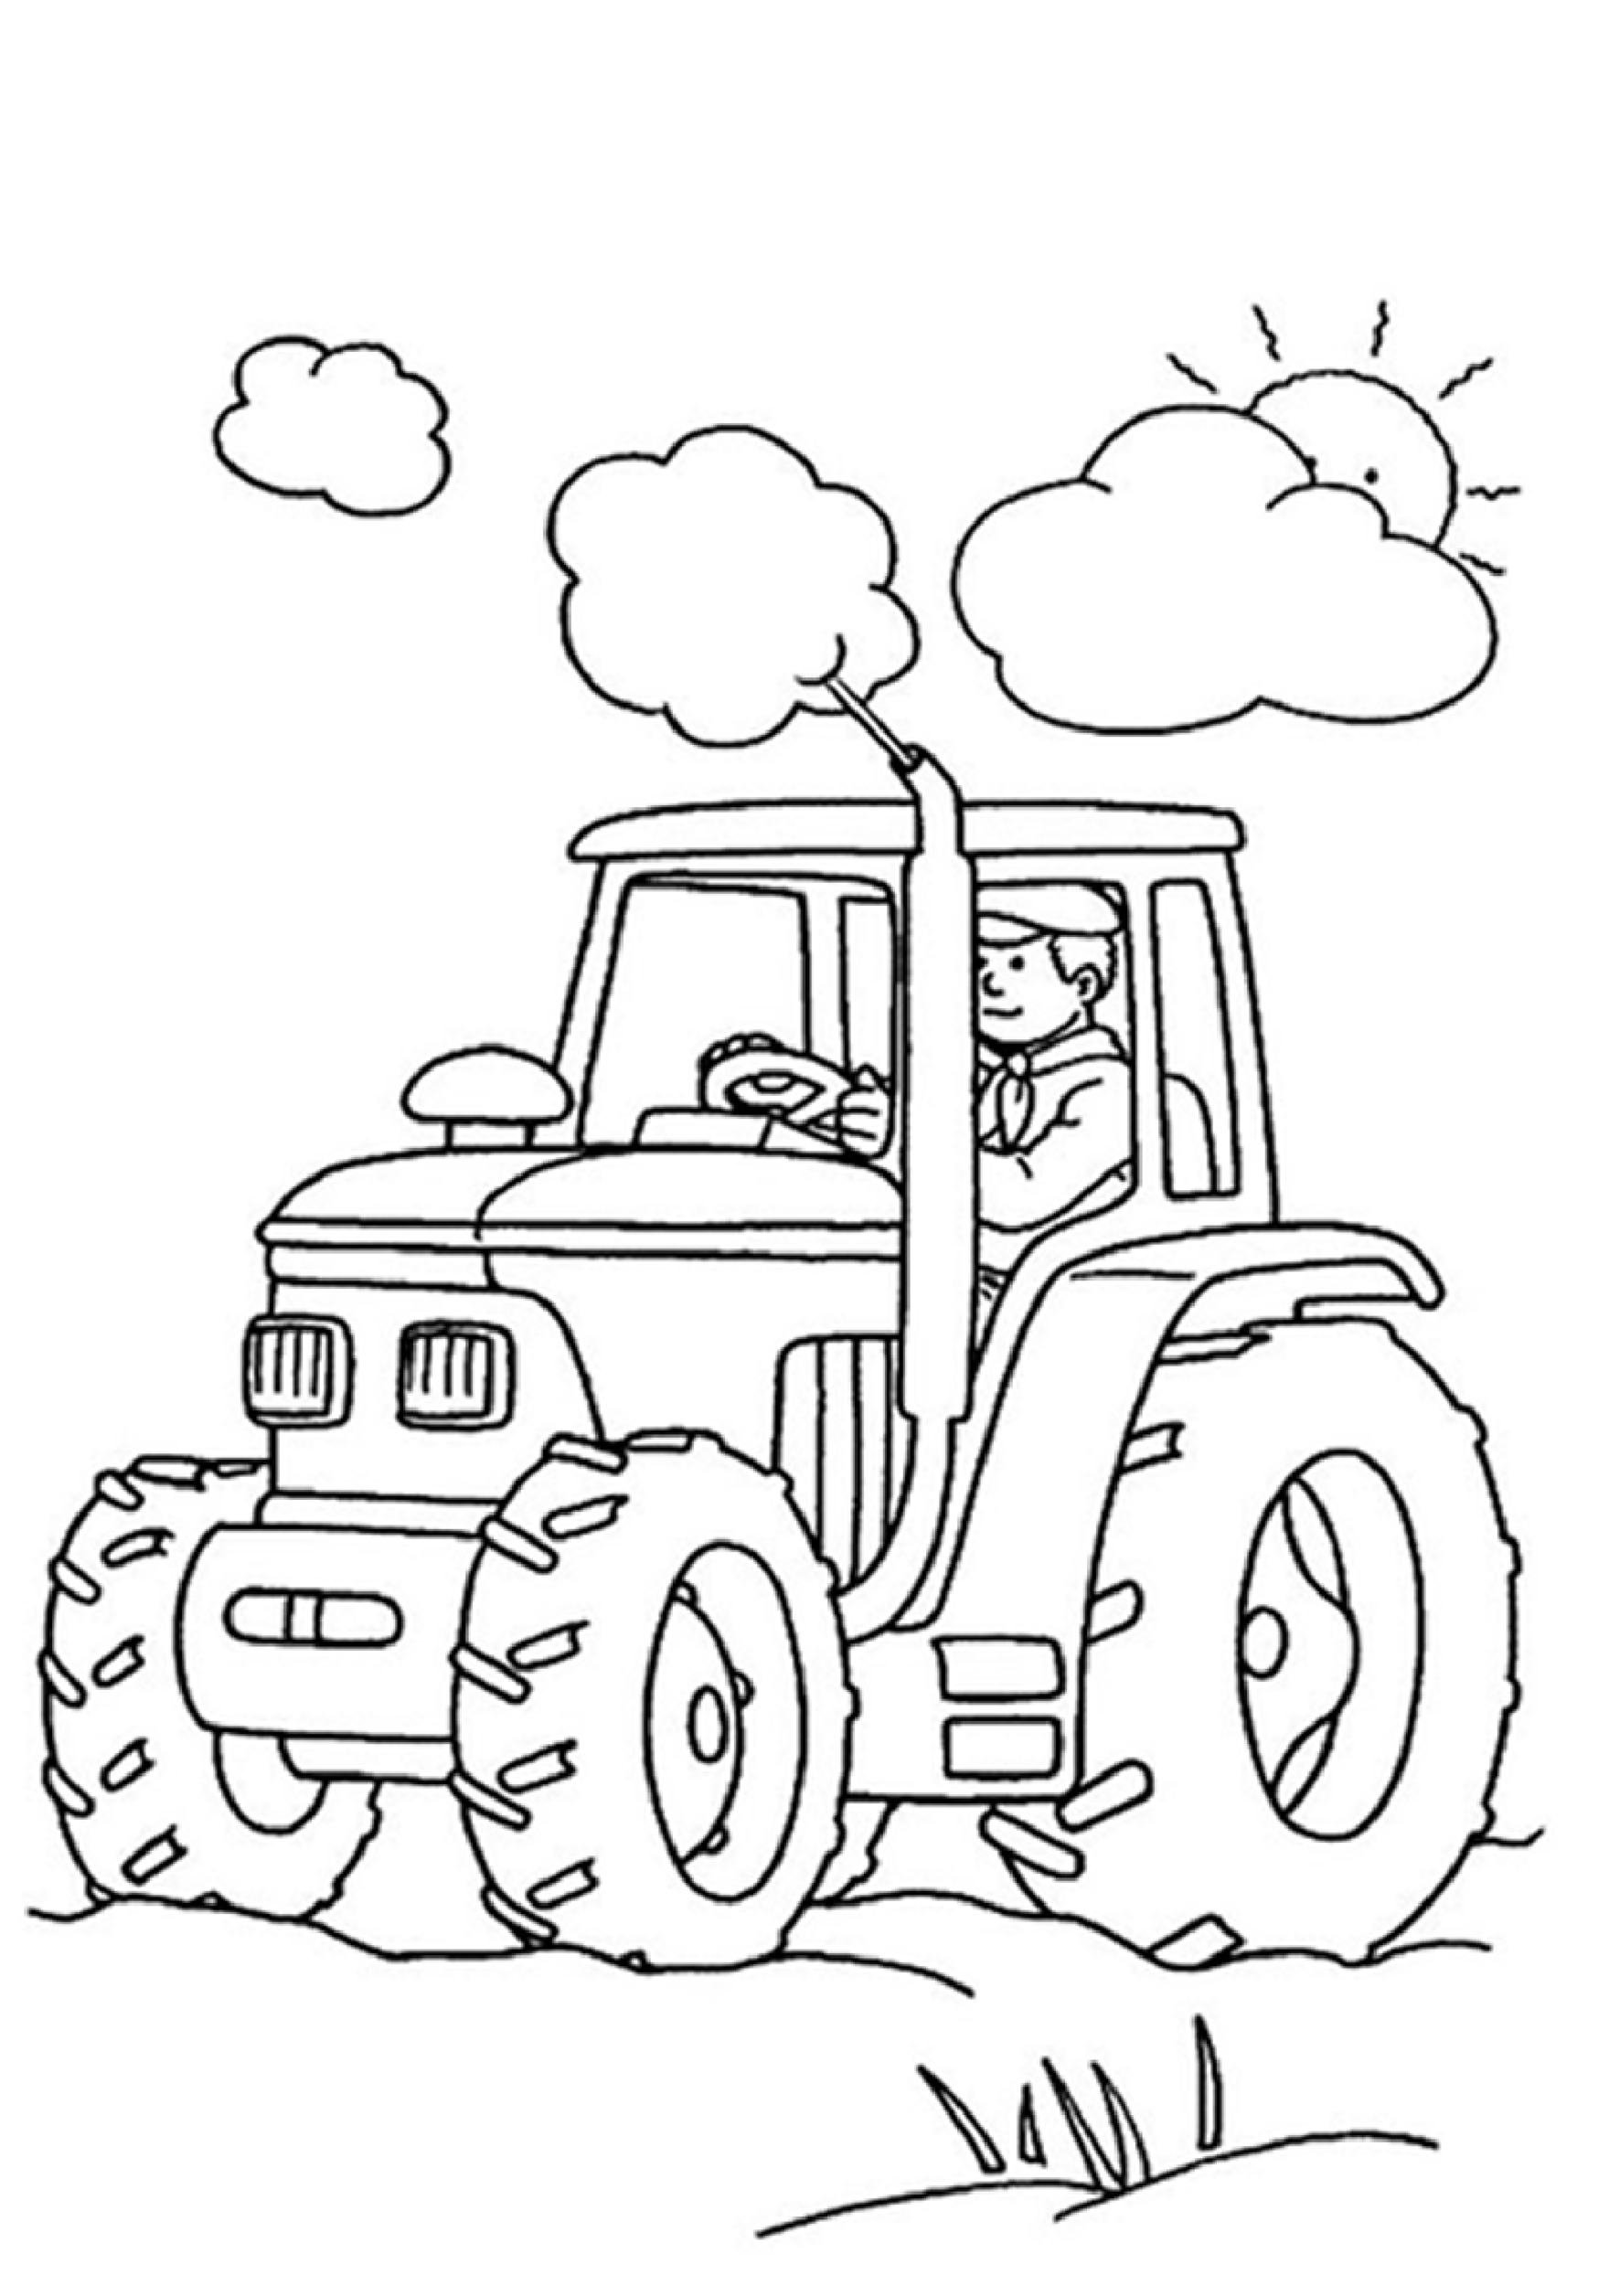 Boy Coloring Pages Pdf - Coloring Home